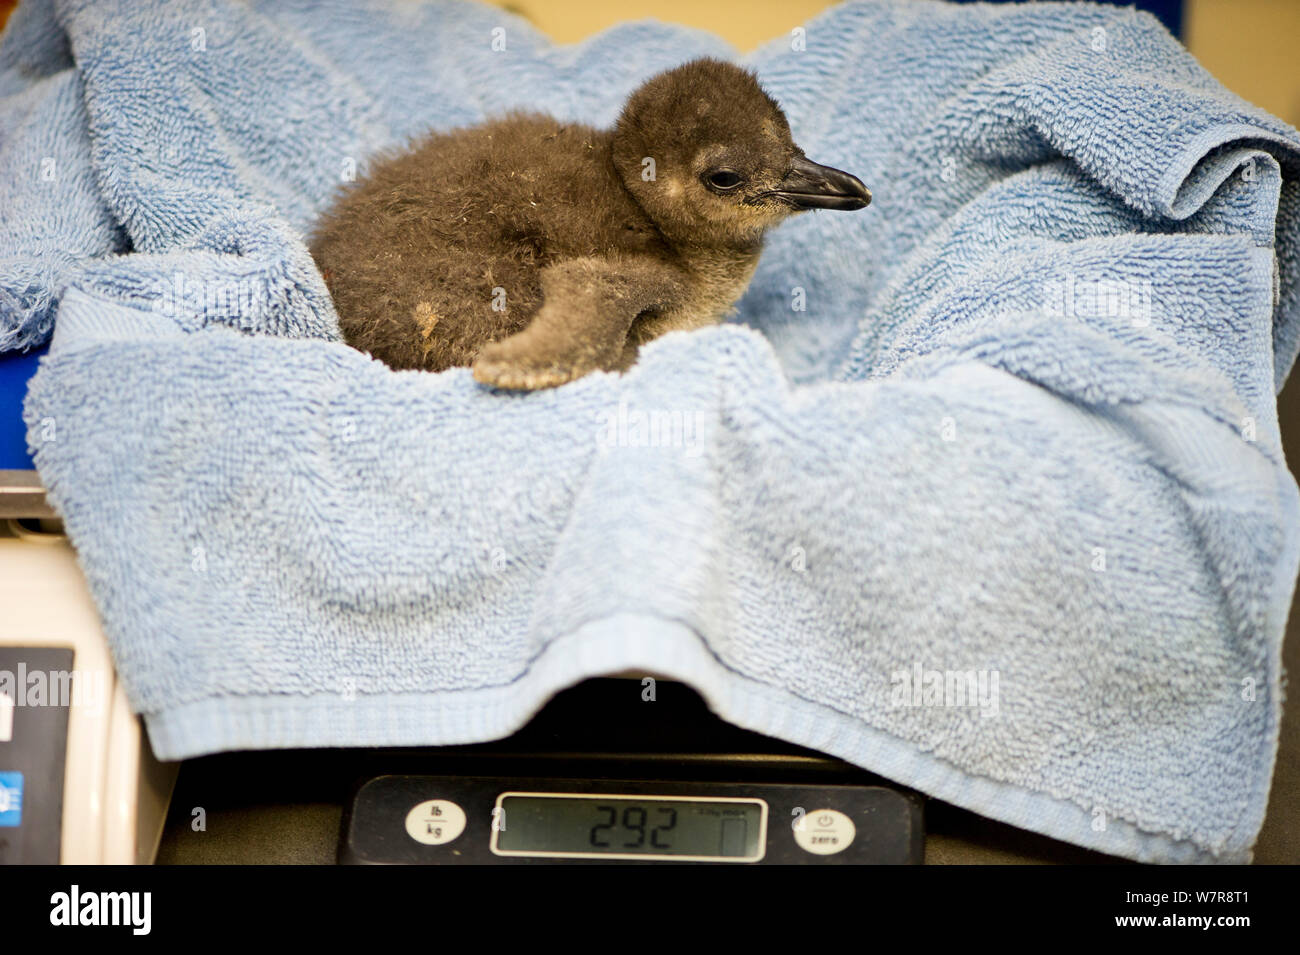 African penguin (Spheniscus demersus) chick being weighed in towel, part of Chick Bolstering Project, Southern African Foundation for the Conservation of Coastal Birds (SANCCOB), South Africa captive, May 2012. Stock Photo